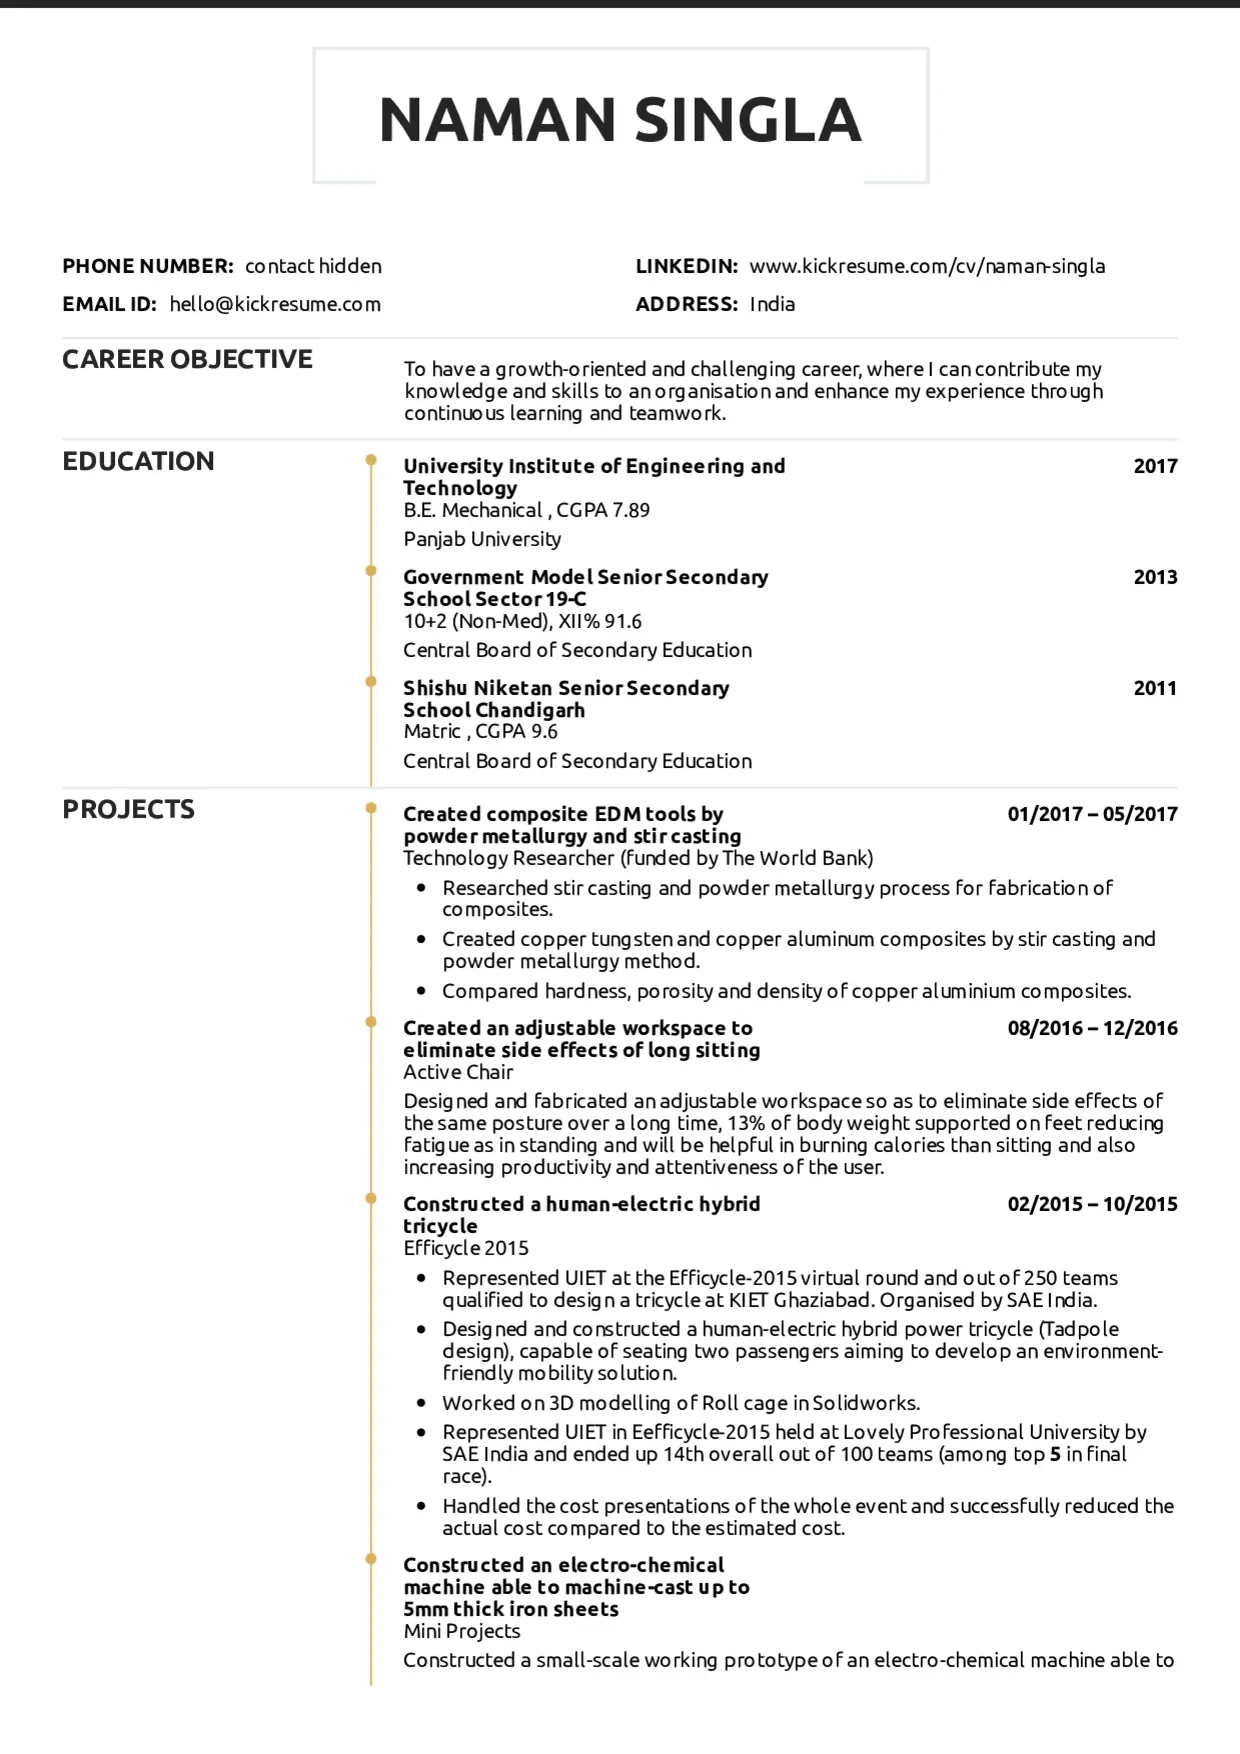 How Do I Make My Banking Resume Stand Out? (+Examples)